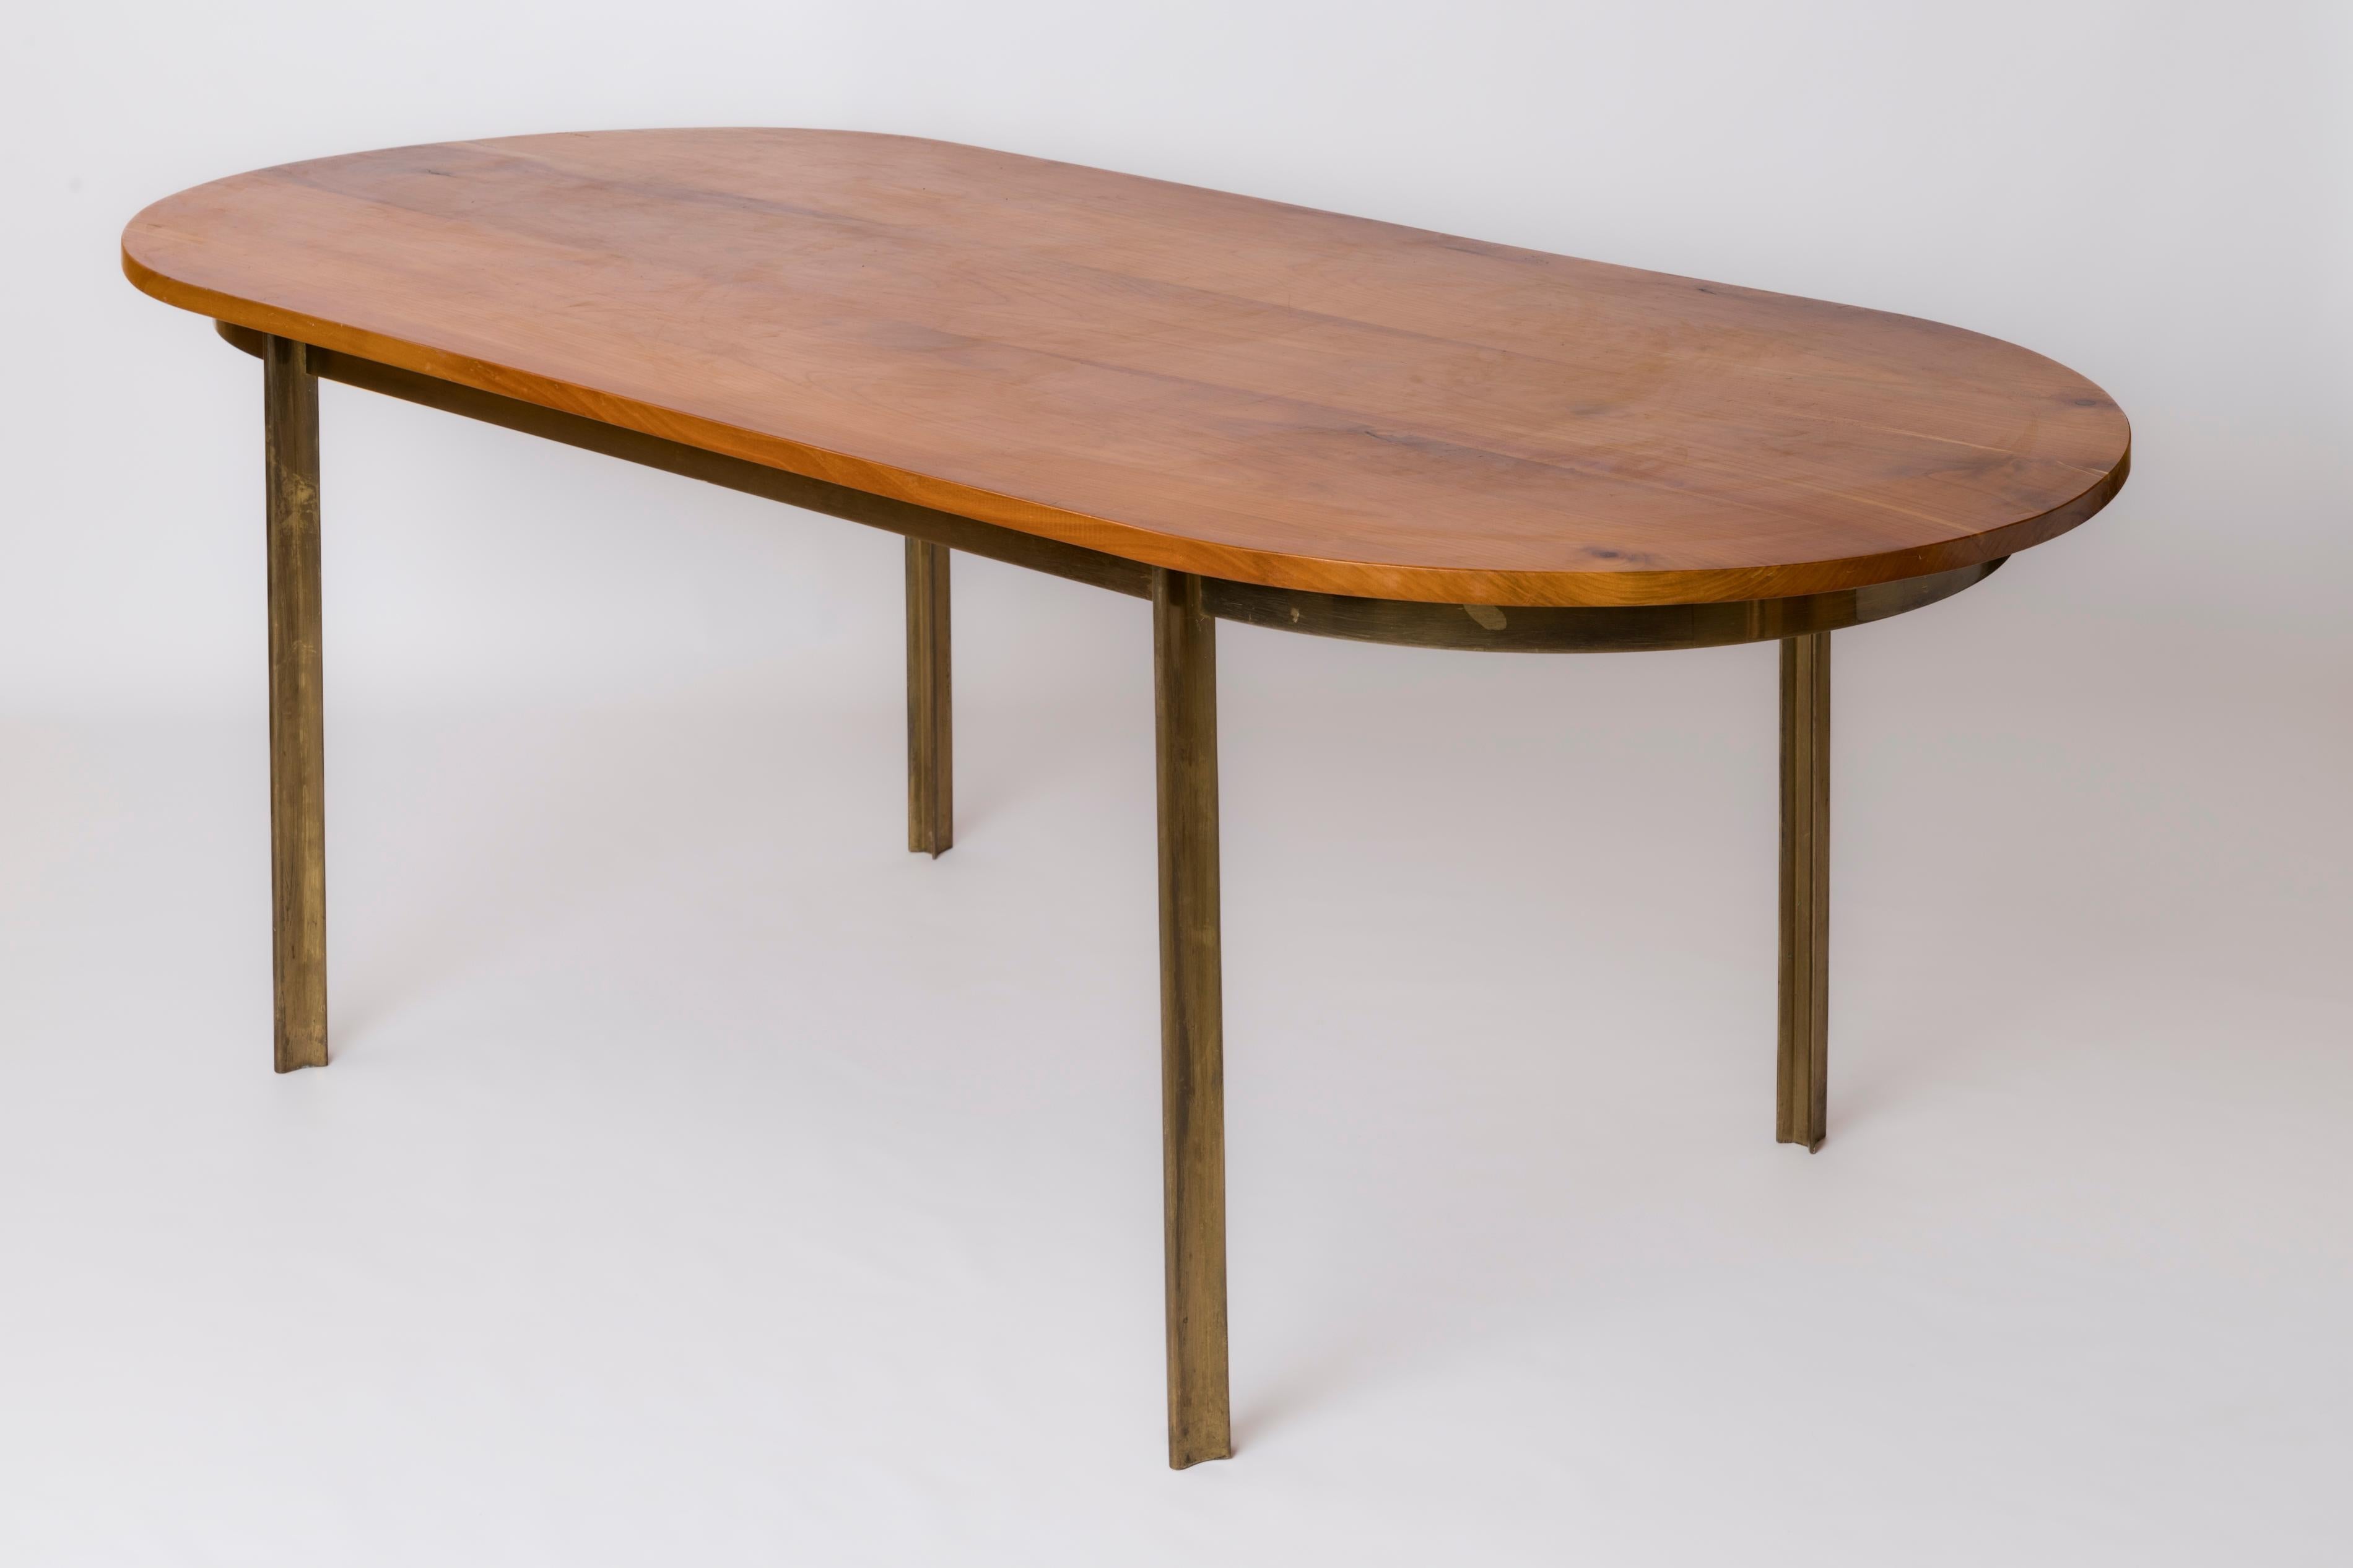 Elegantly designed solid bronze dining table by Jacques Quinet for Broncz (signature presence on one legs). Three stems clover shaped feet
In good vintage condition. The elm top is not original and shows some scratches and scuffs ; to be ideally